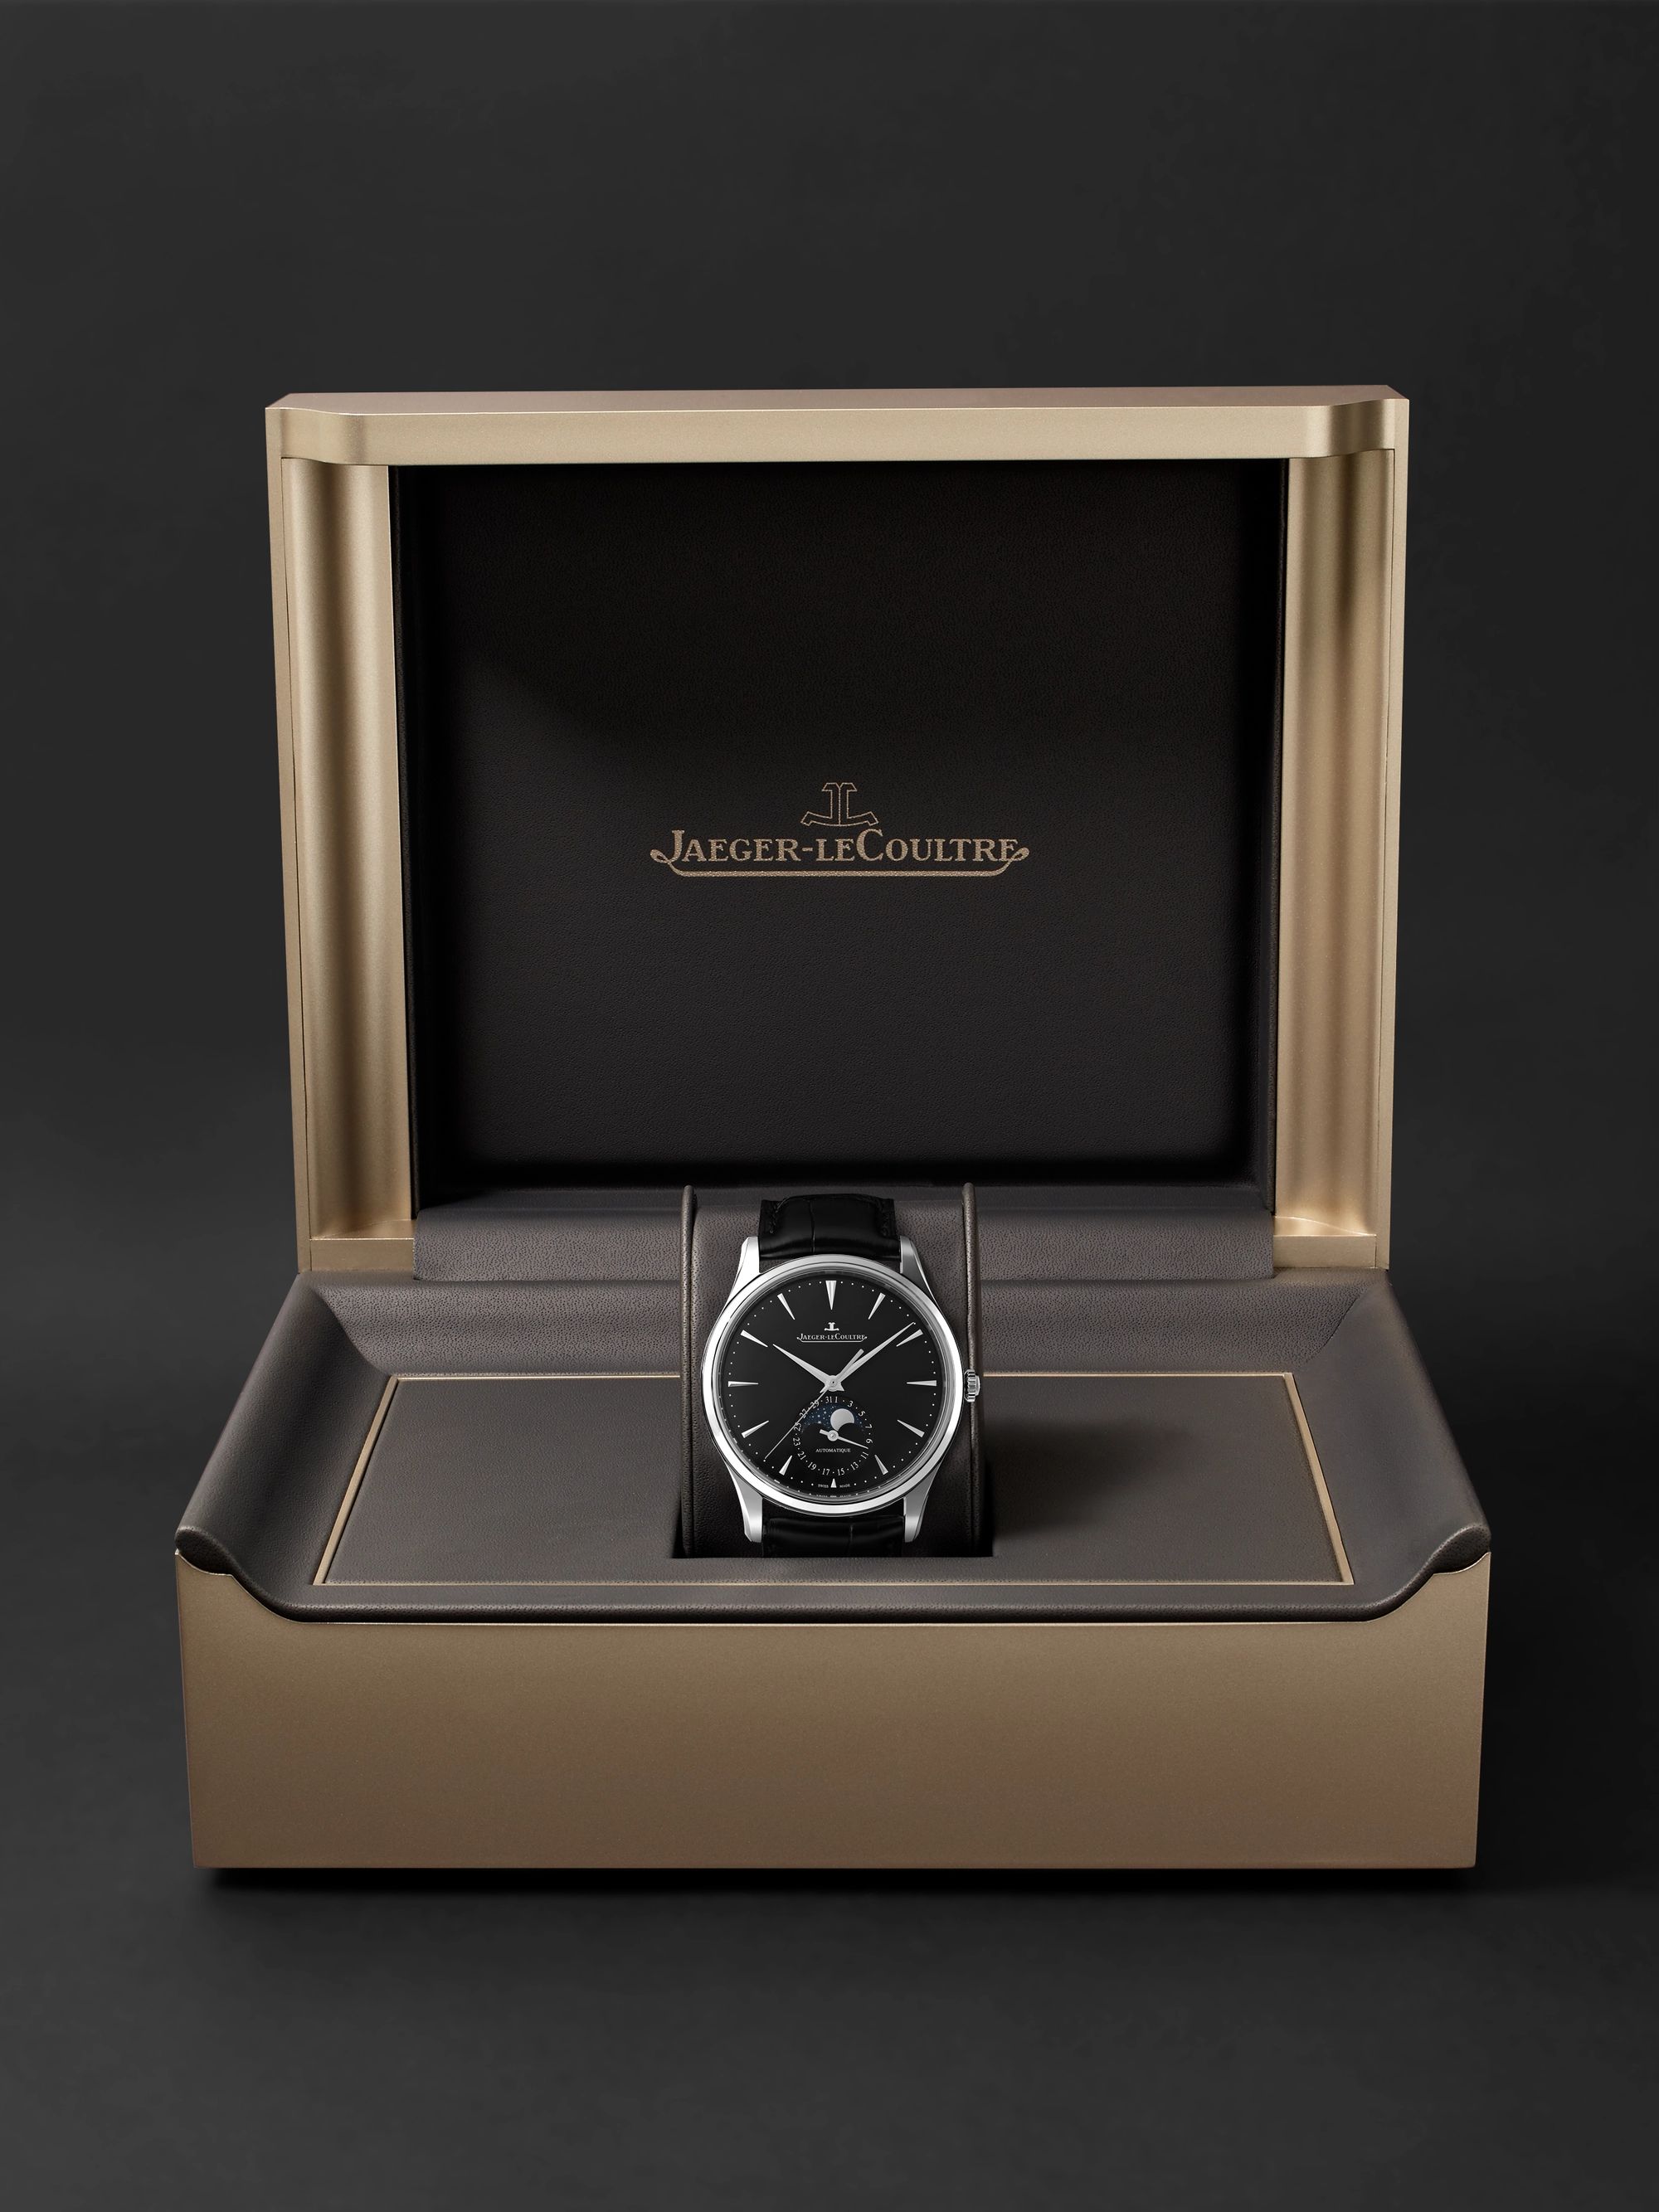 JAEGER-LECOULTRE Master Ultra Thin Automatic Moon-Phase 39mm Stainless Steel and Alligator Watch, Ref. No. 1368471